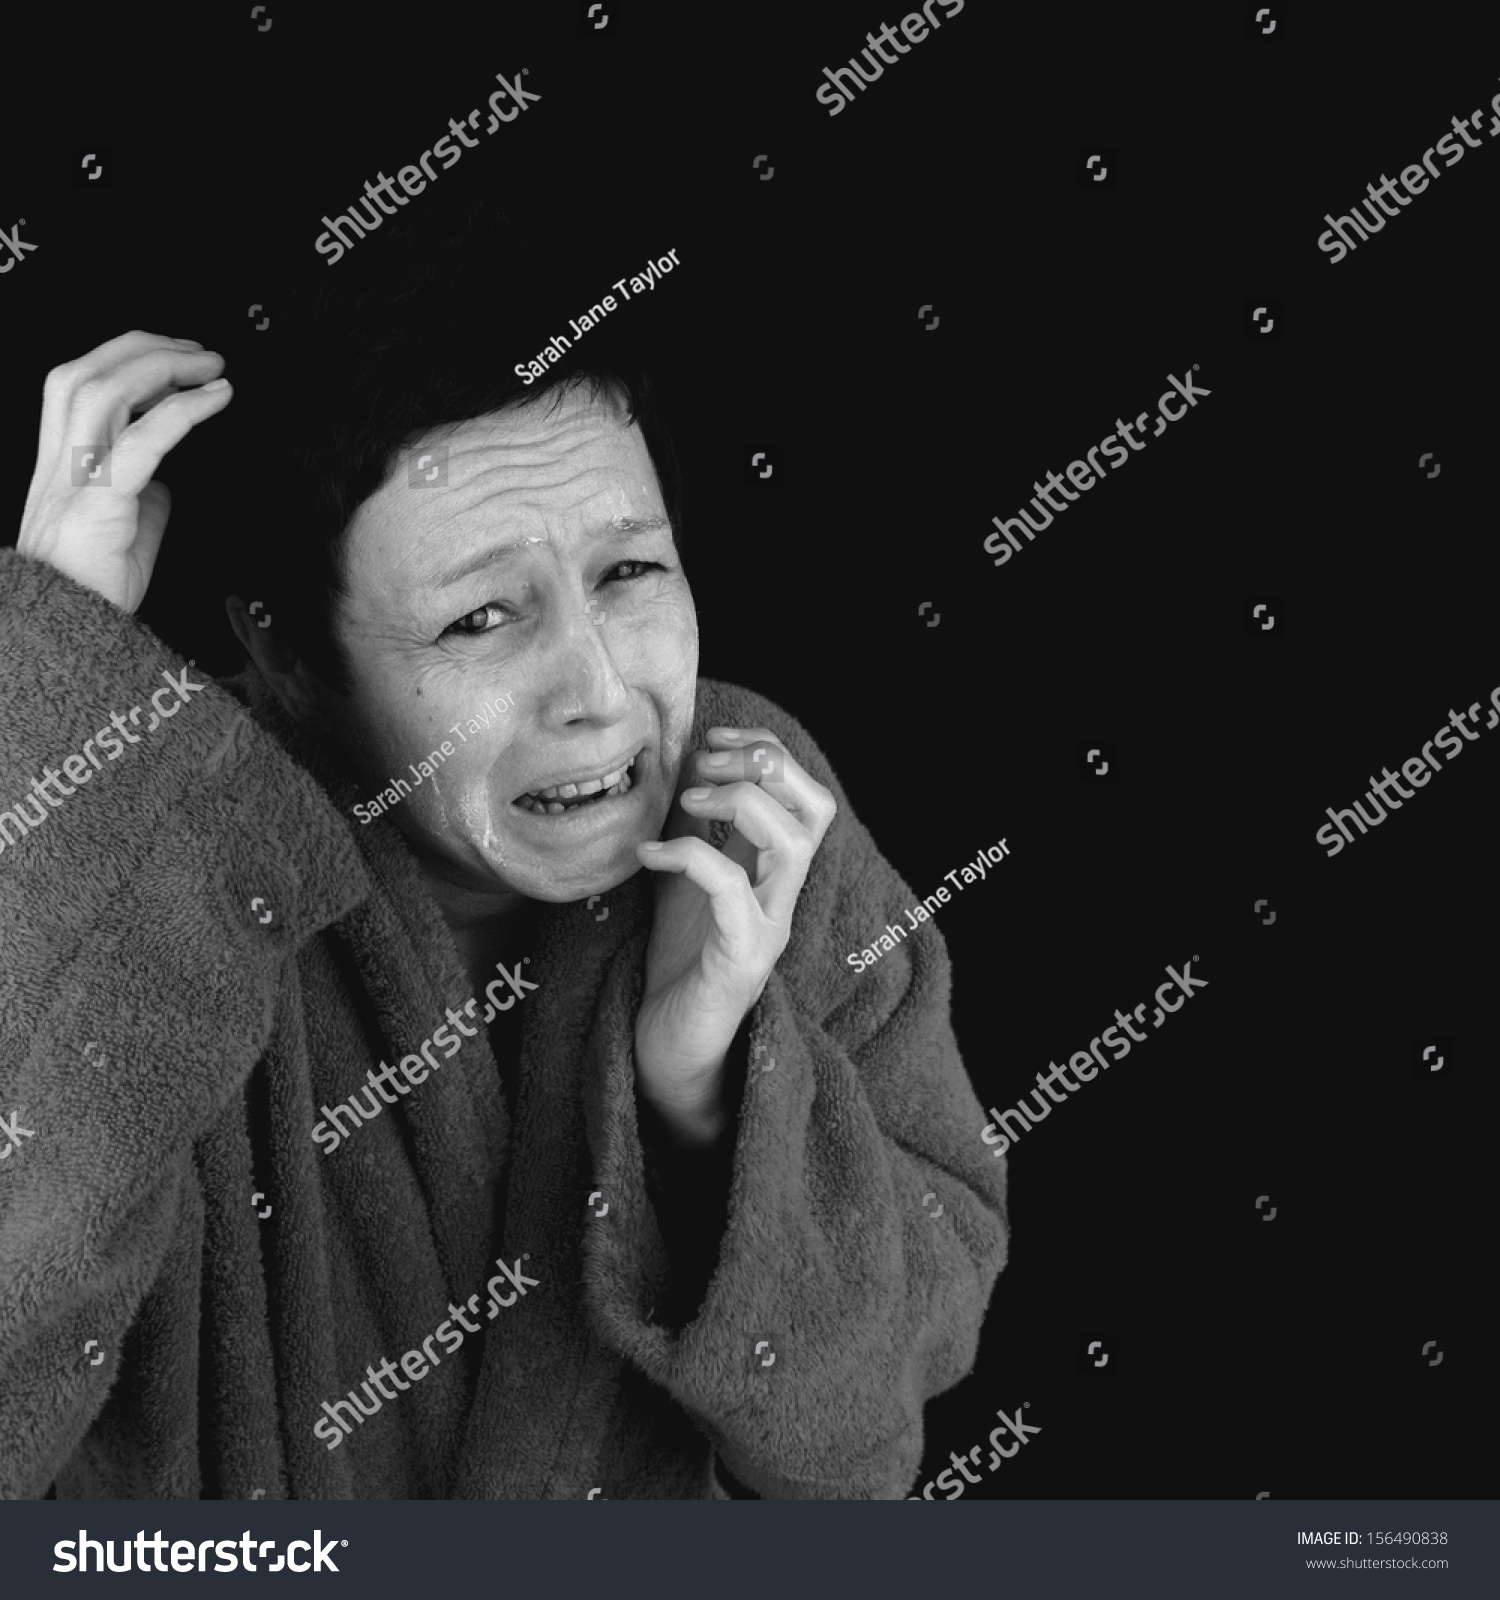 stock-photo-scared-depressed-woman-wearing-bathrobe-cowering-in-fear-black-and-white-image-156490838.jpg